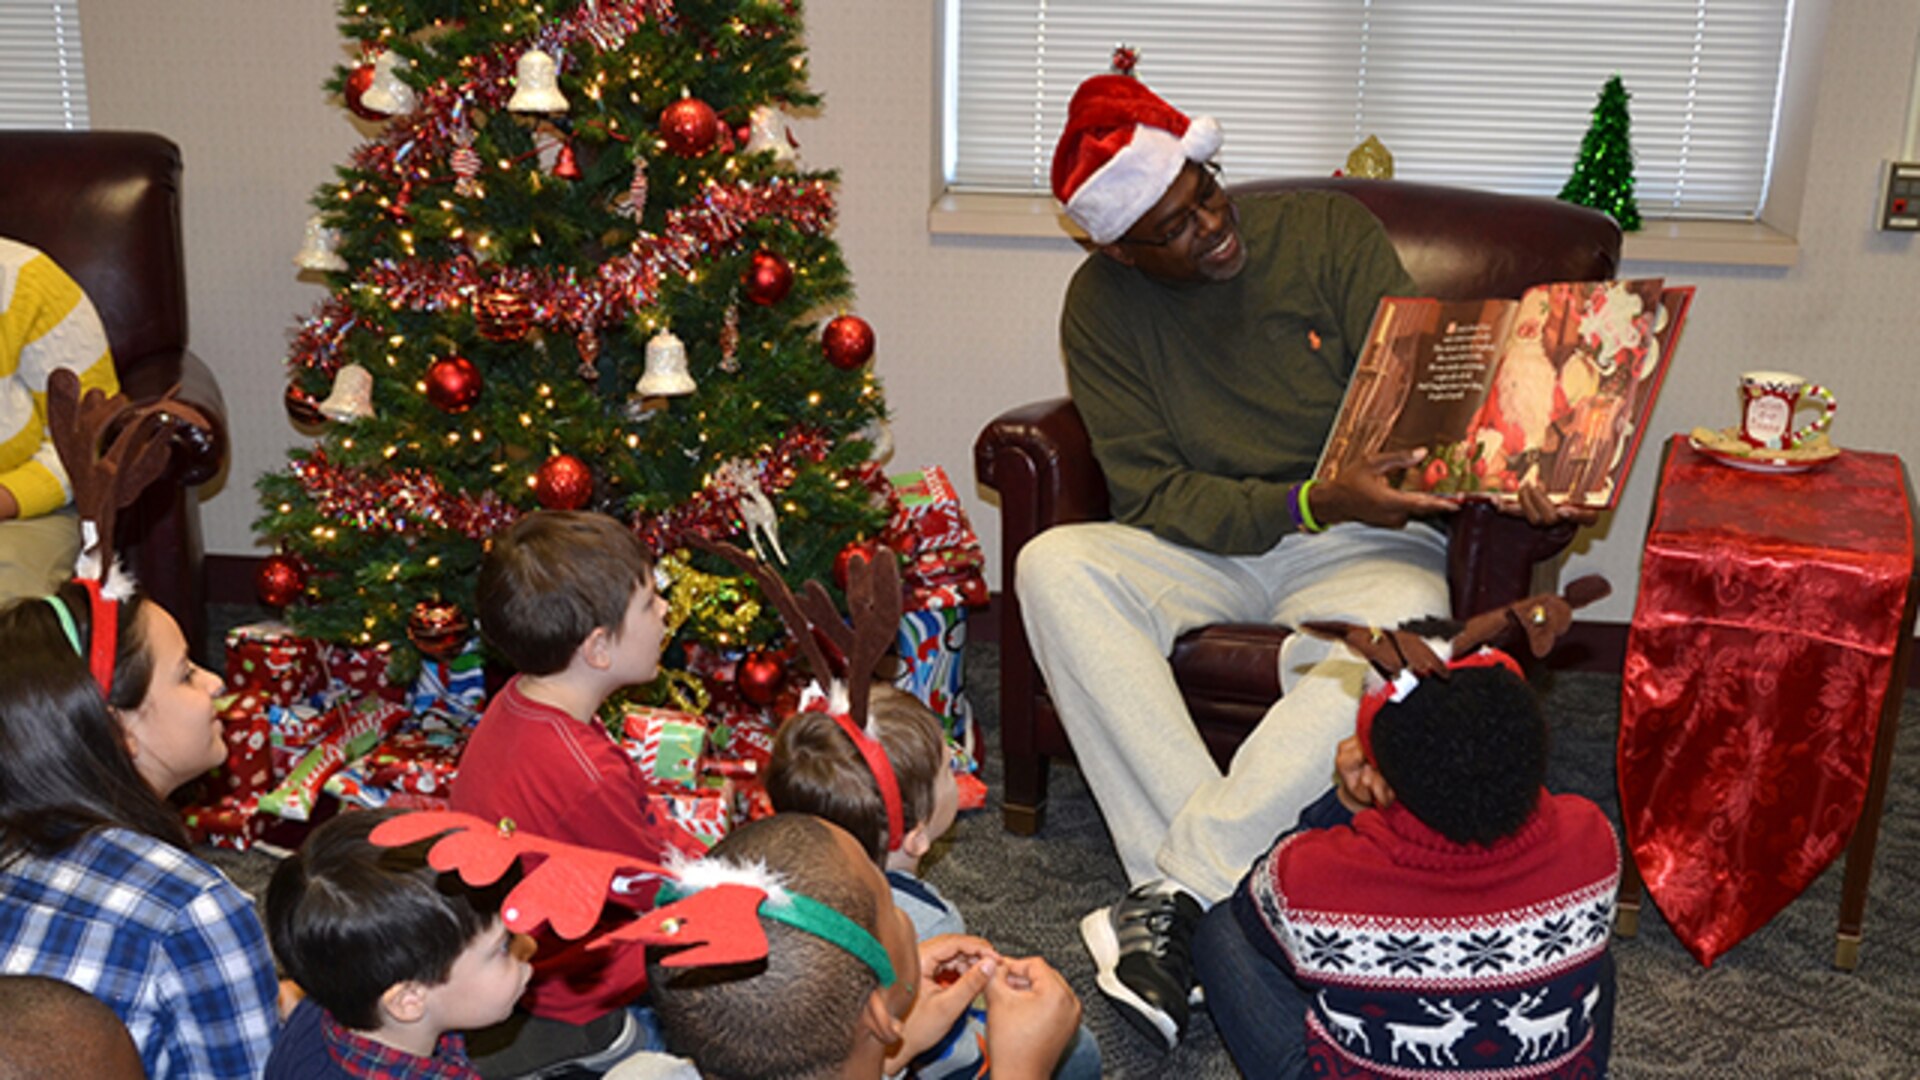 Defense Logistics Agency Aviation Customer Operations Mapping employee, Kevin Bettis, division chief, reads to children of Mapping employees Dec. 20, 2016. The children came to the installation to make Christmas cards to attach to gifts purchased by employees. The gifts are being donated to the children who are patients at Children’s Hospital of Richmond at Virginia Commonwealth University.